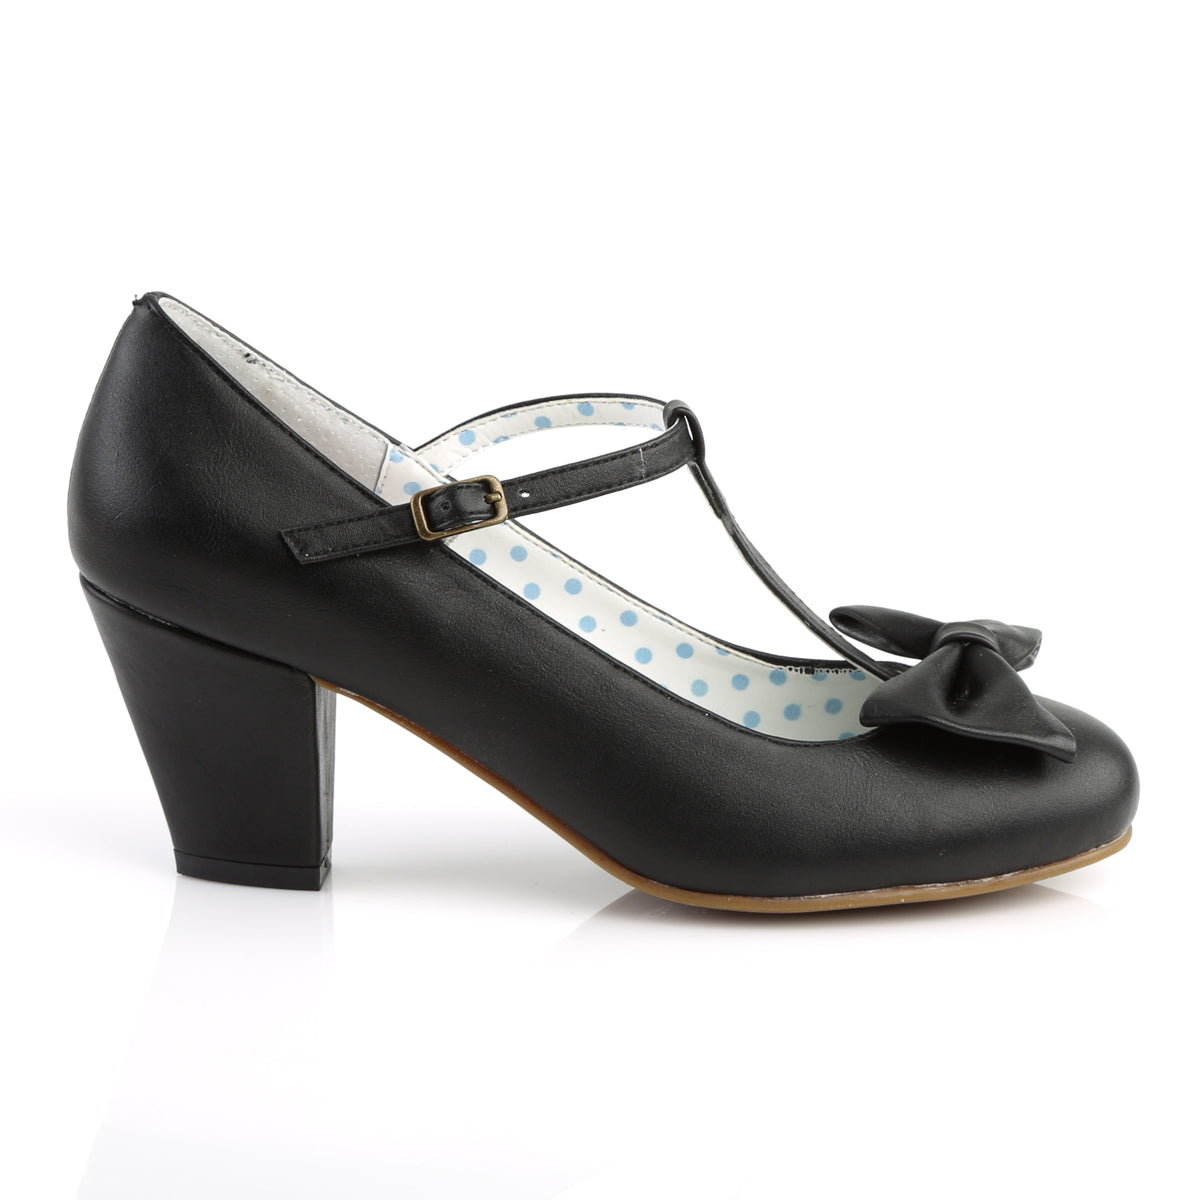 WIGGLE-50 Pin Up Couture Black Faux Leather Single Soles [Sexy Shoes]